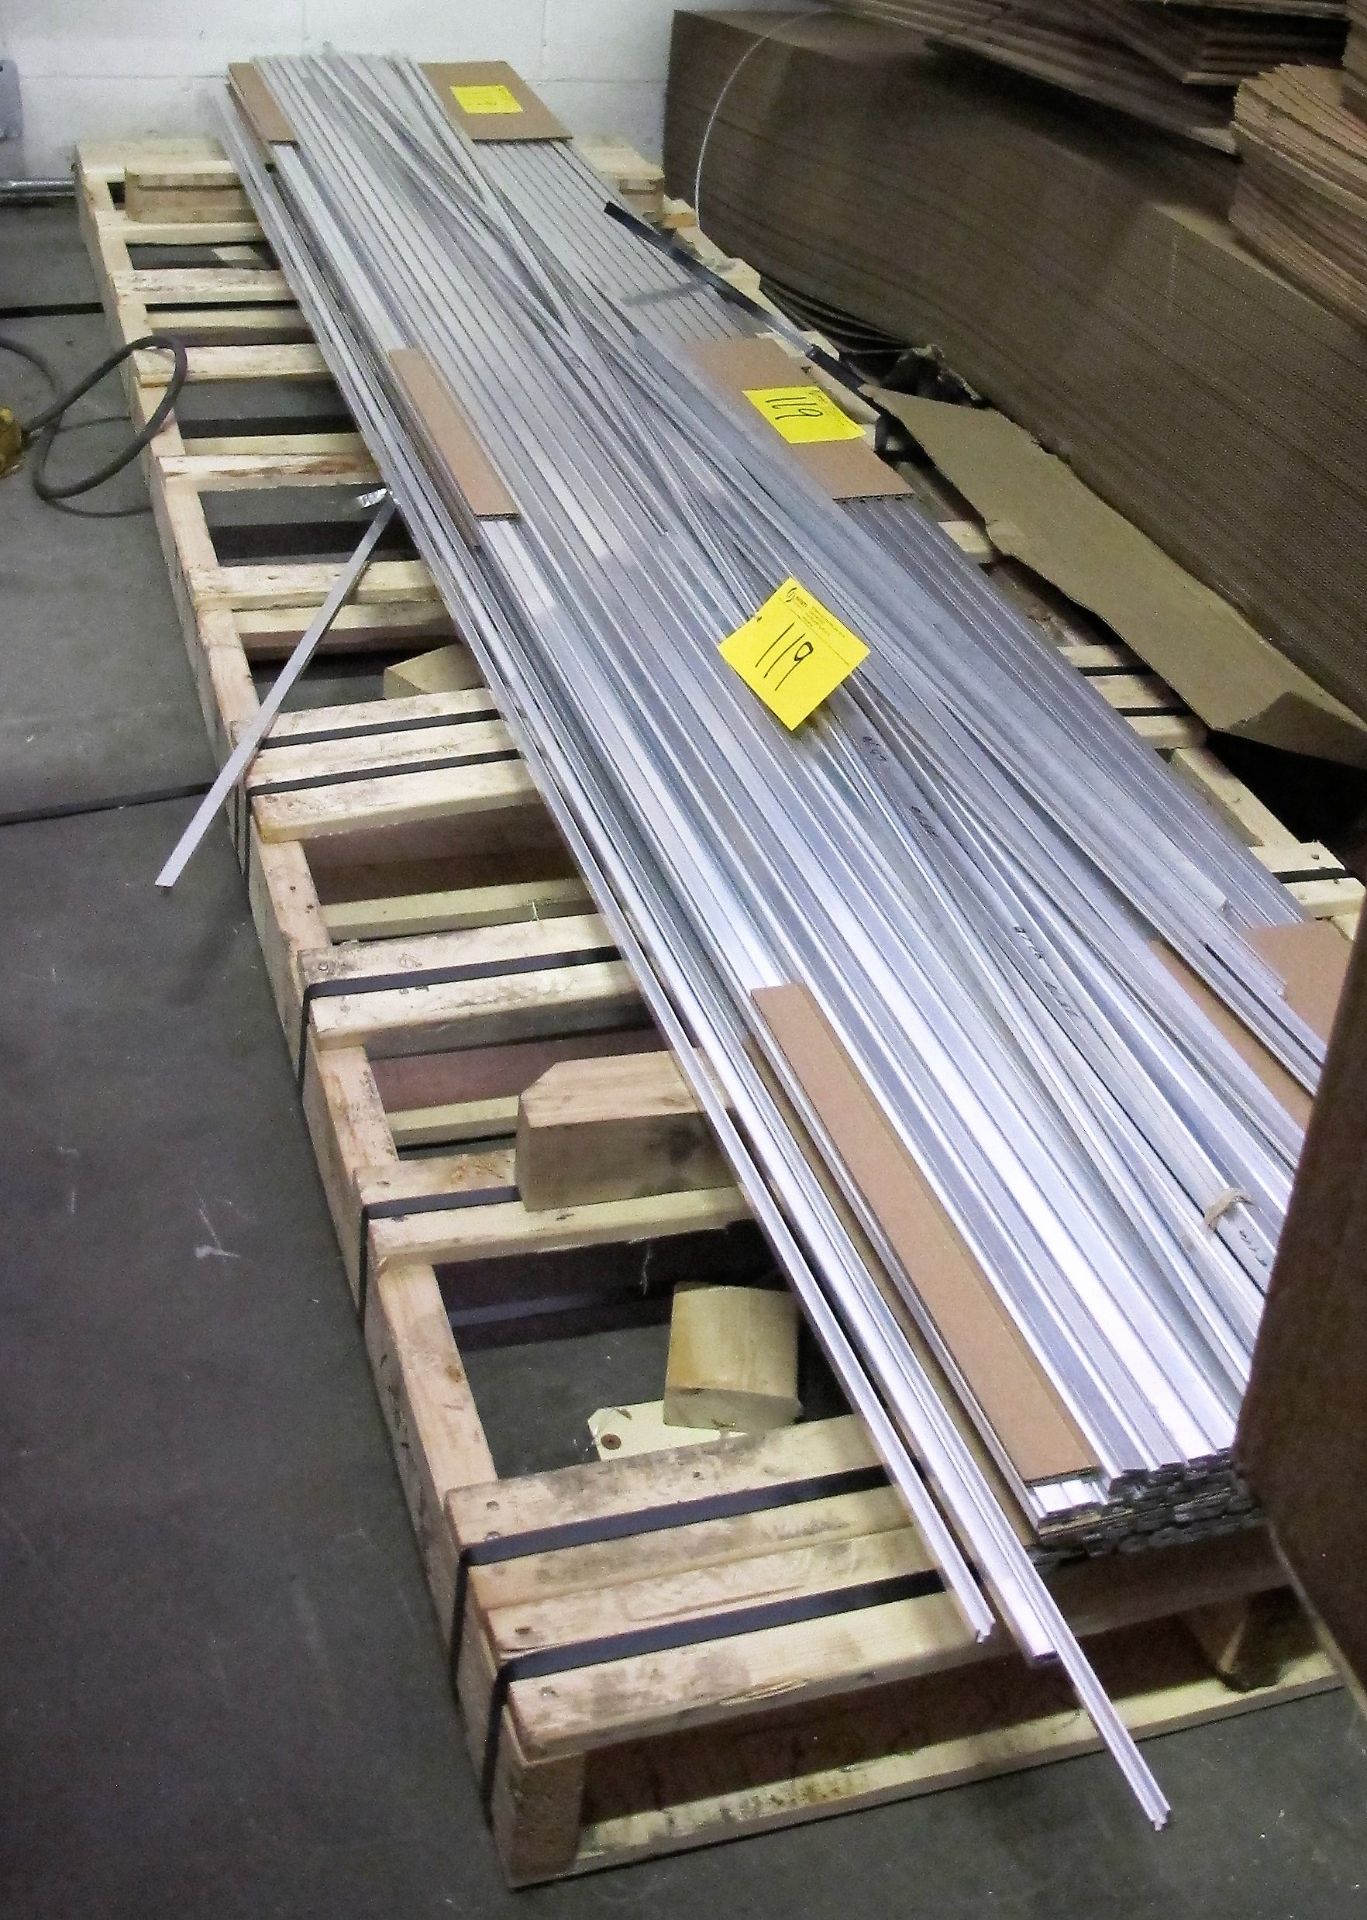 LARGE QTY OF ASST. ALUMINUM EXTRUSIONS, UP TO 8' LENGTH (APPROX. 12,500LBS) - Image 8 of 8